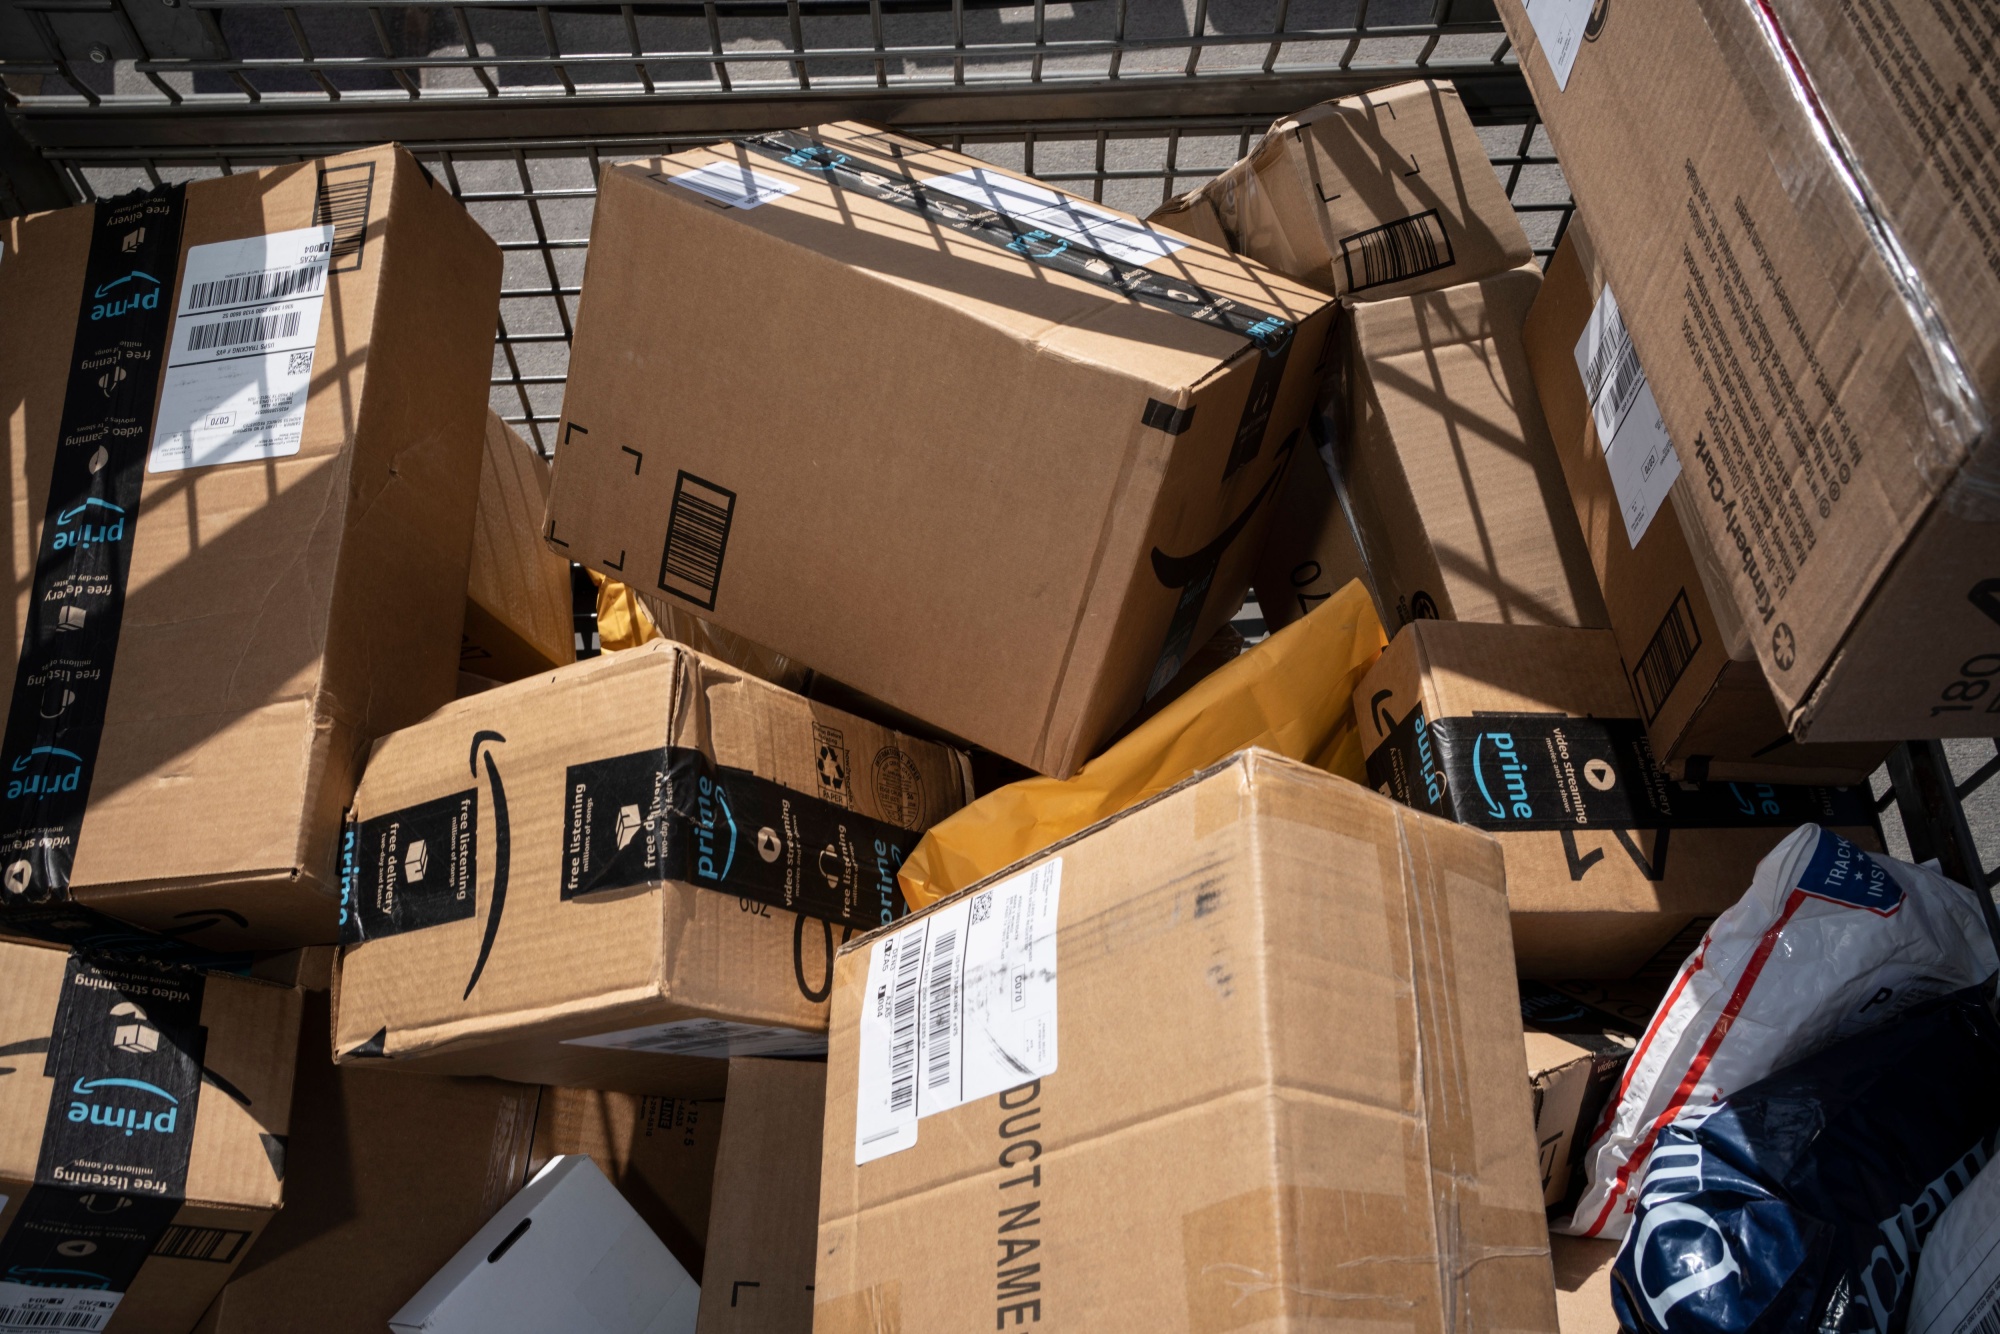 Online Shopping Post Covid Misread by  (AMZN), Others - Bloomberg